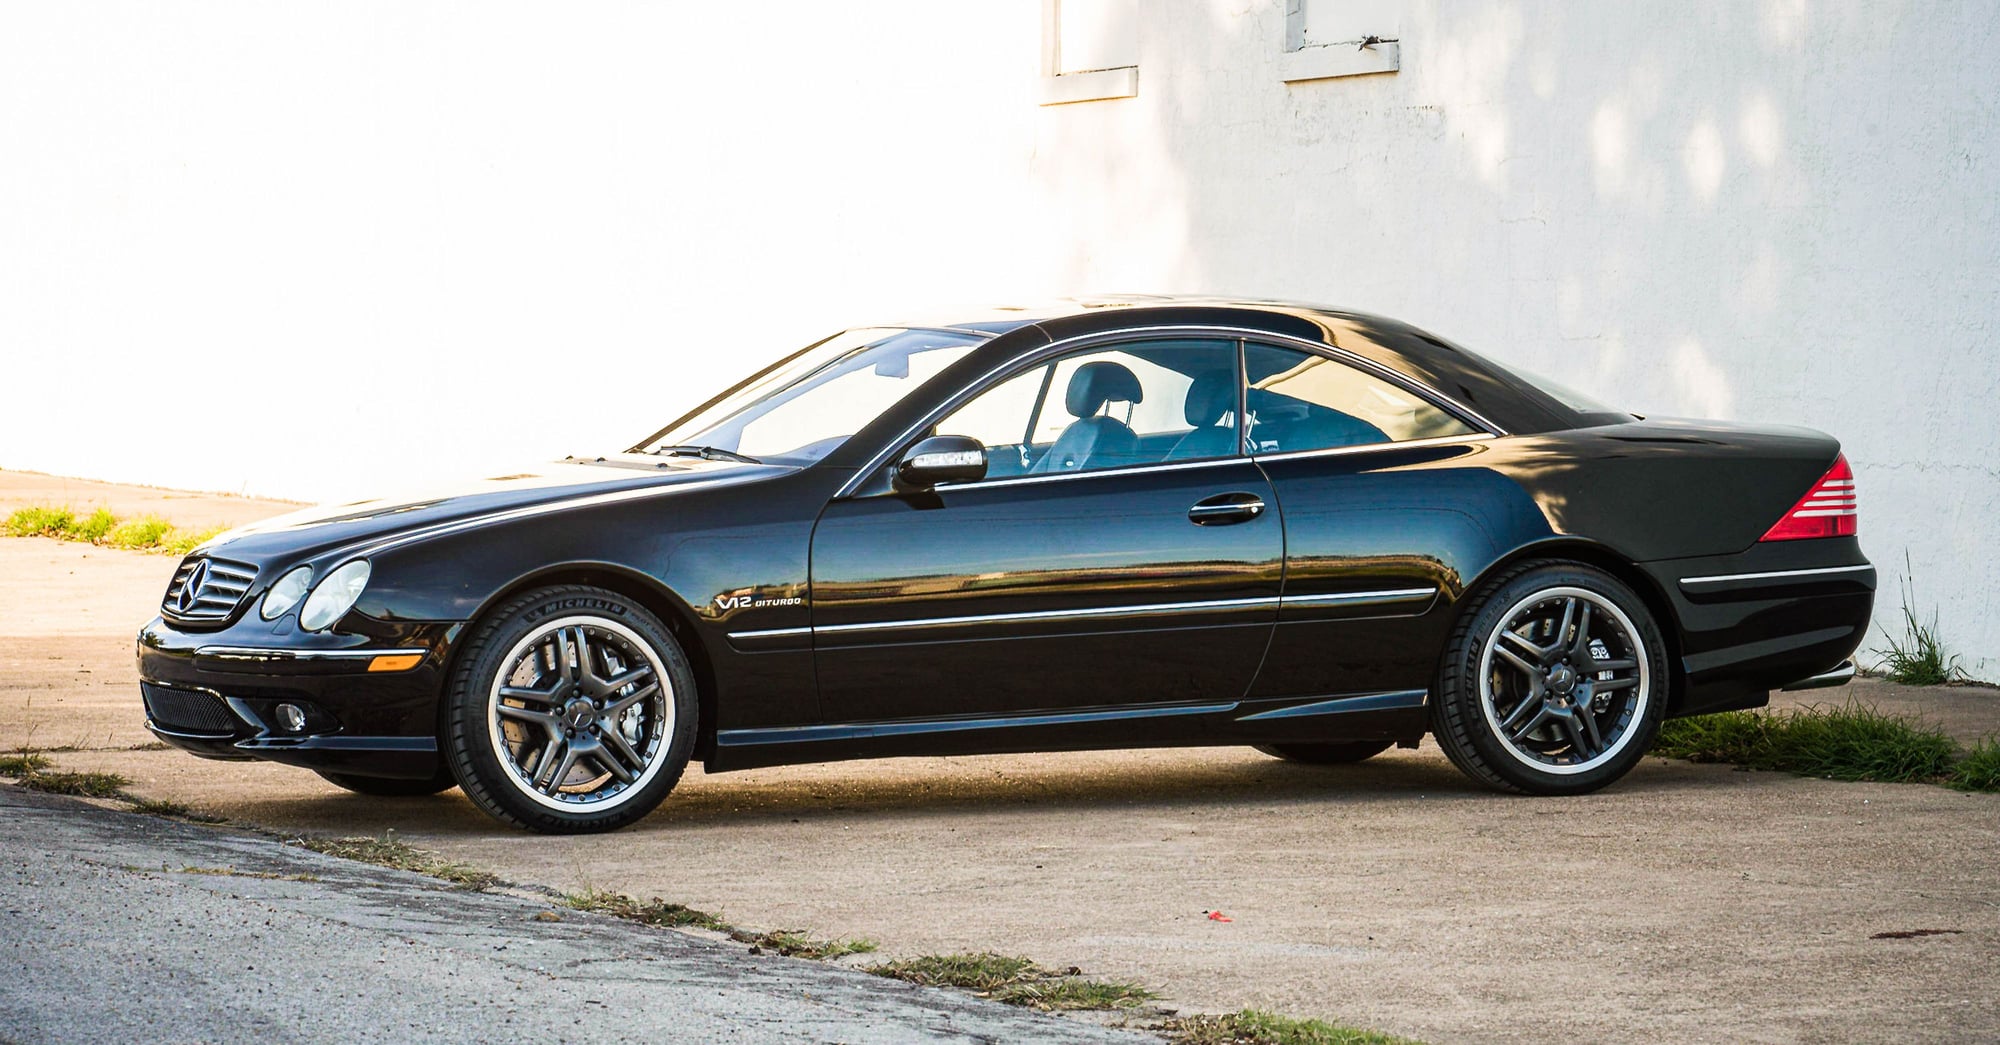 2005 Mercedes-Benz CL65 AMG - 2005 Mercedes Benz CL65 AMG - Used - VIN WDBPJ79J65A043869 - 31,045 Miles - 12 cyl - 2WD - Automatic - Coupe - Black - Waco, TX 76712, United States